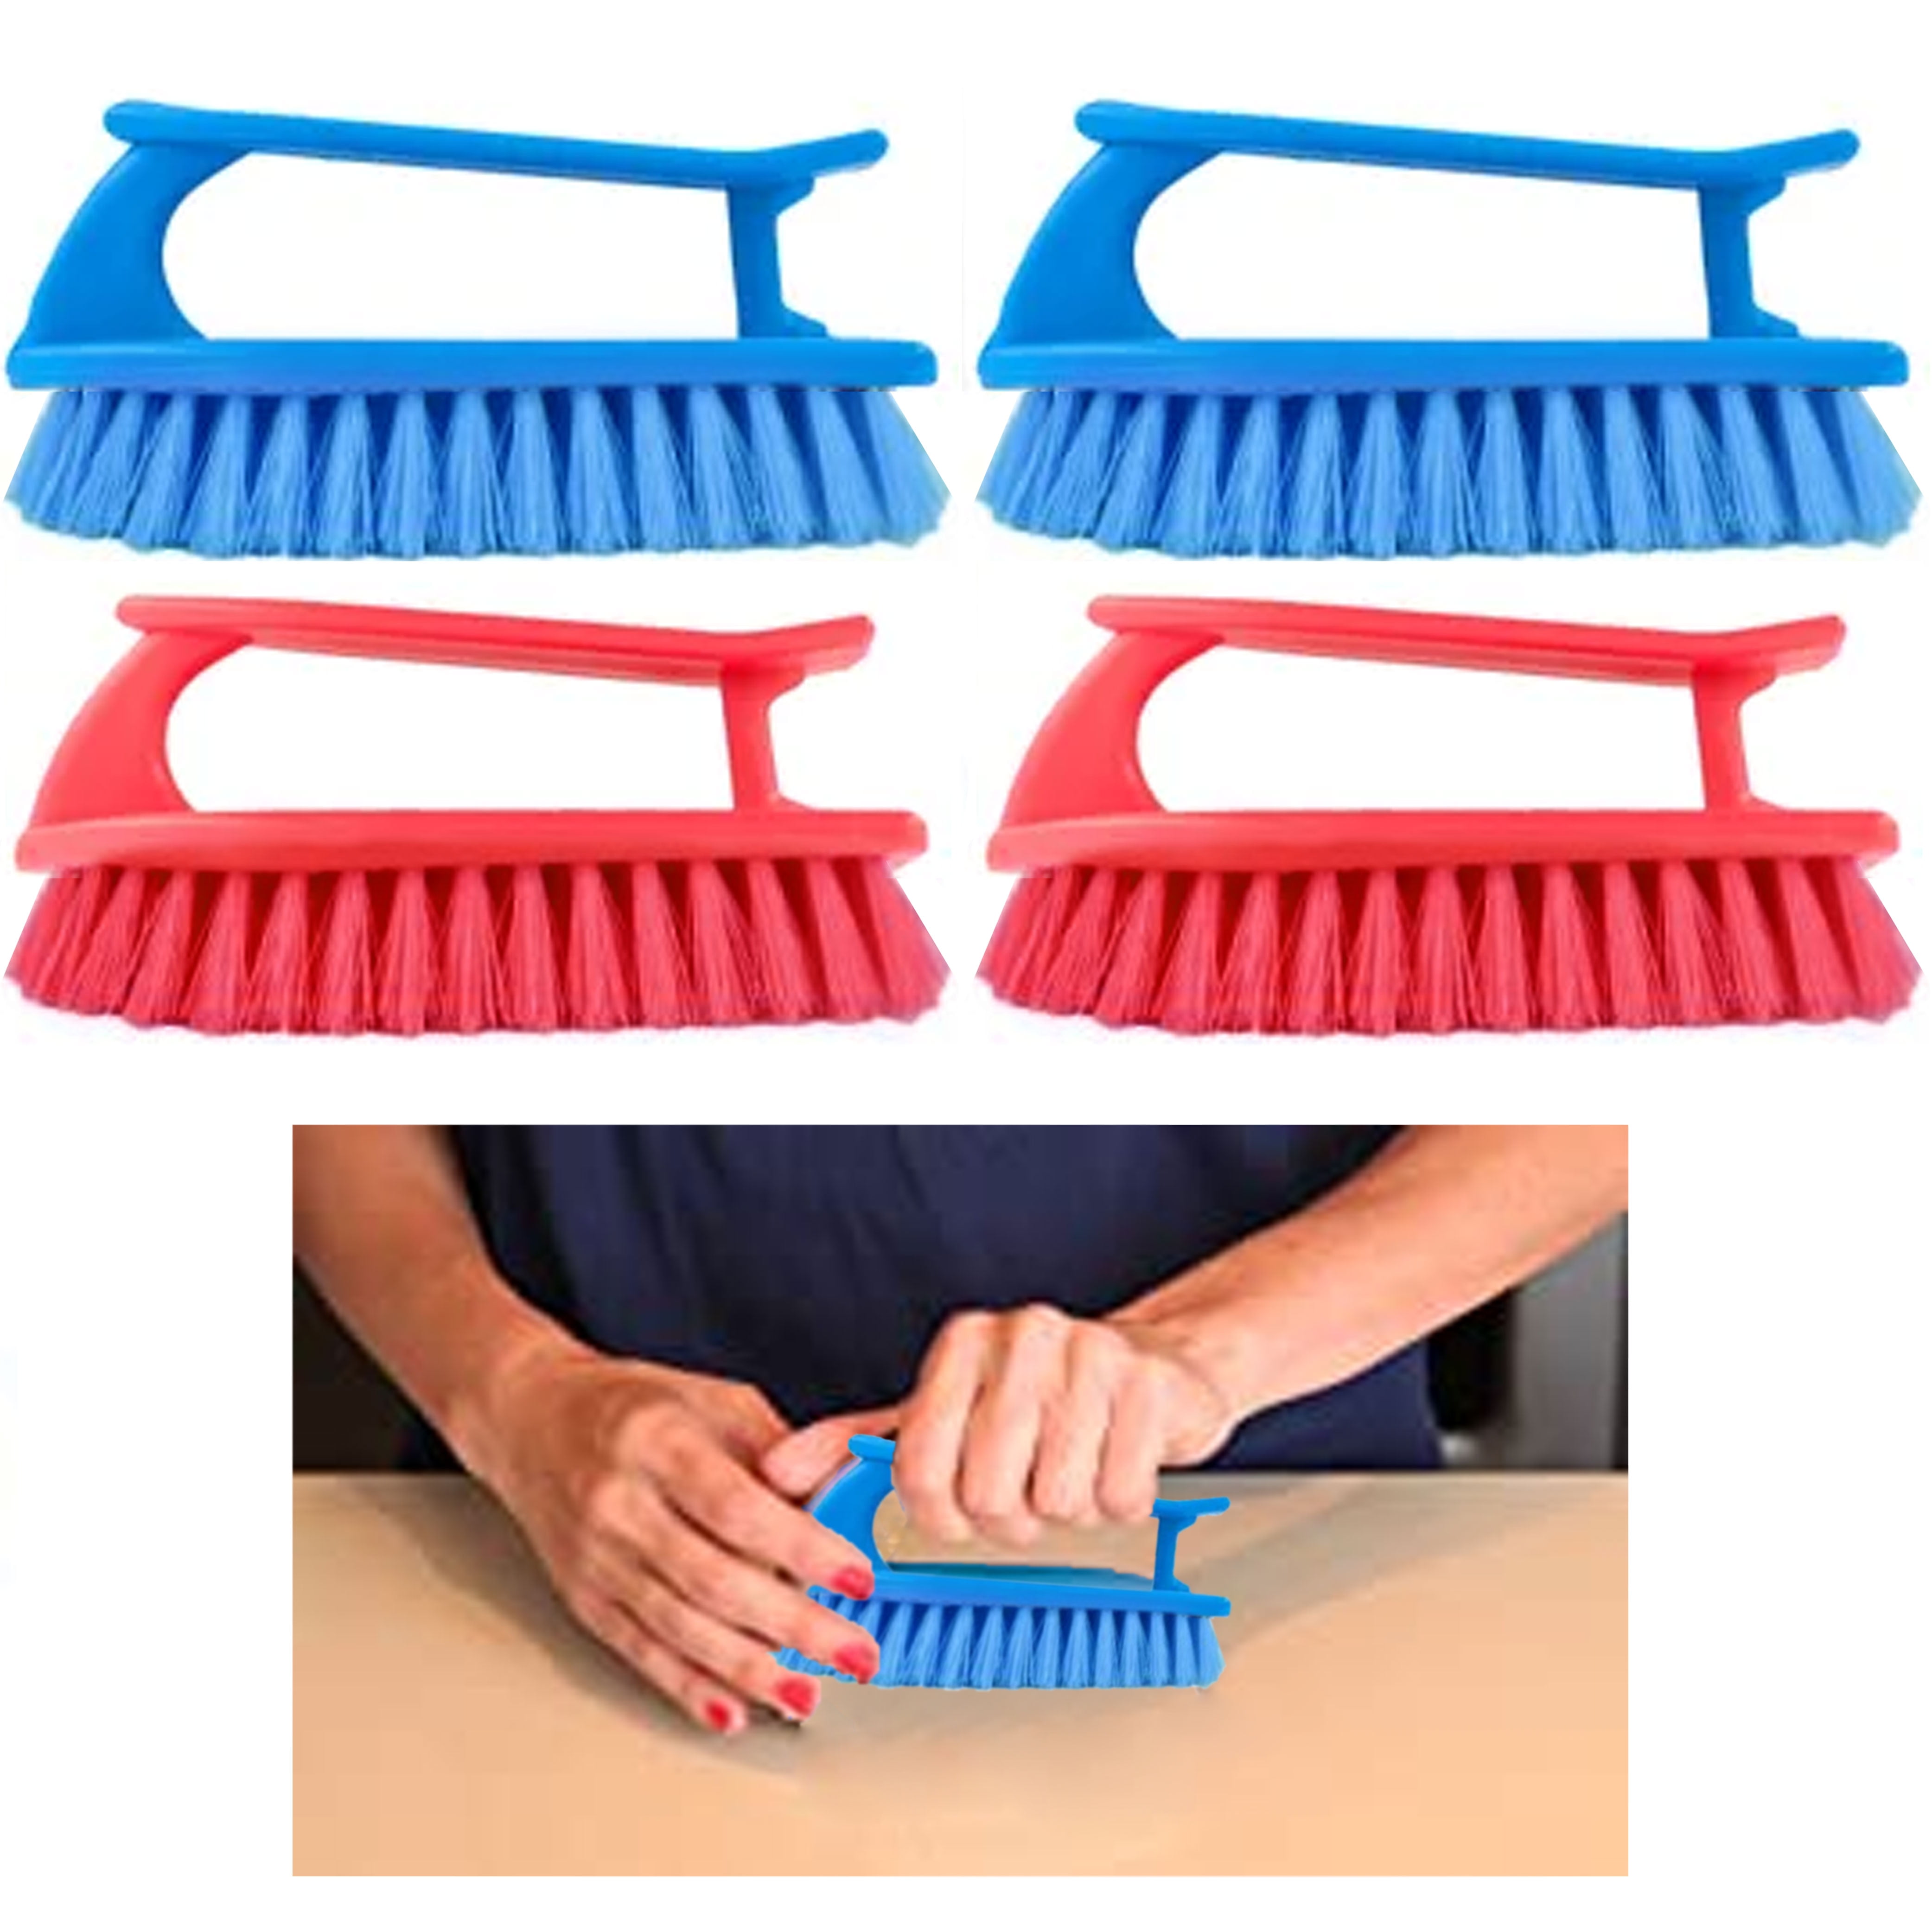 WENSTIER 4 PCS Small Cleaning Brush Set for Household Use, Small Scrub  Brushes for Cleaning Kitchen Sink Corner